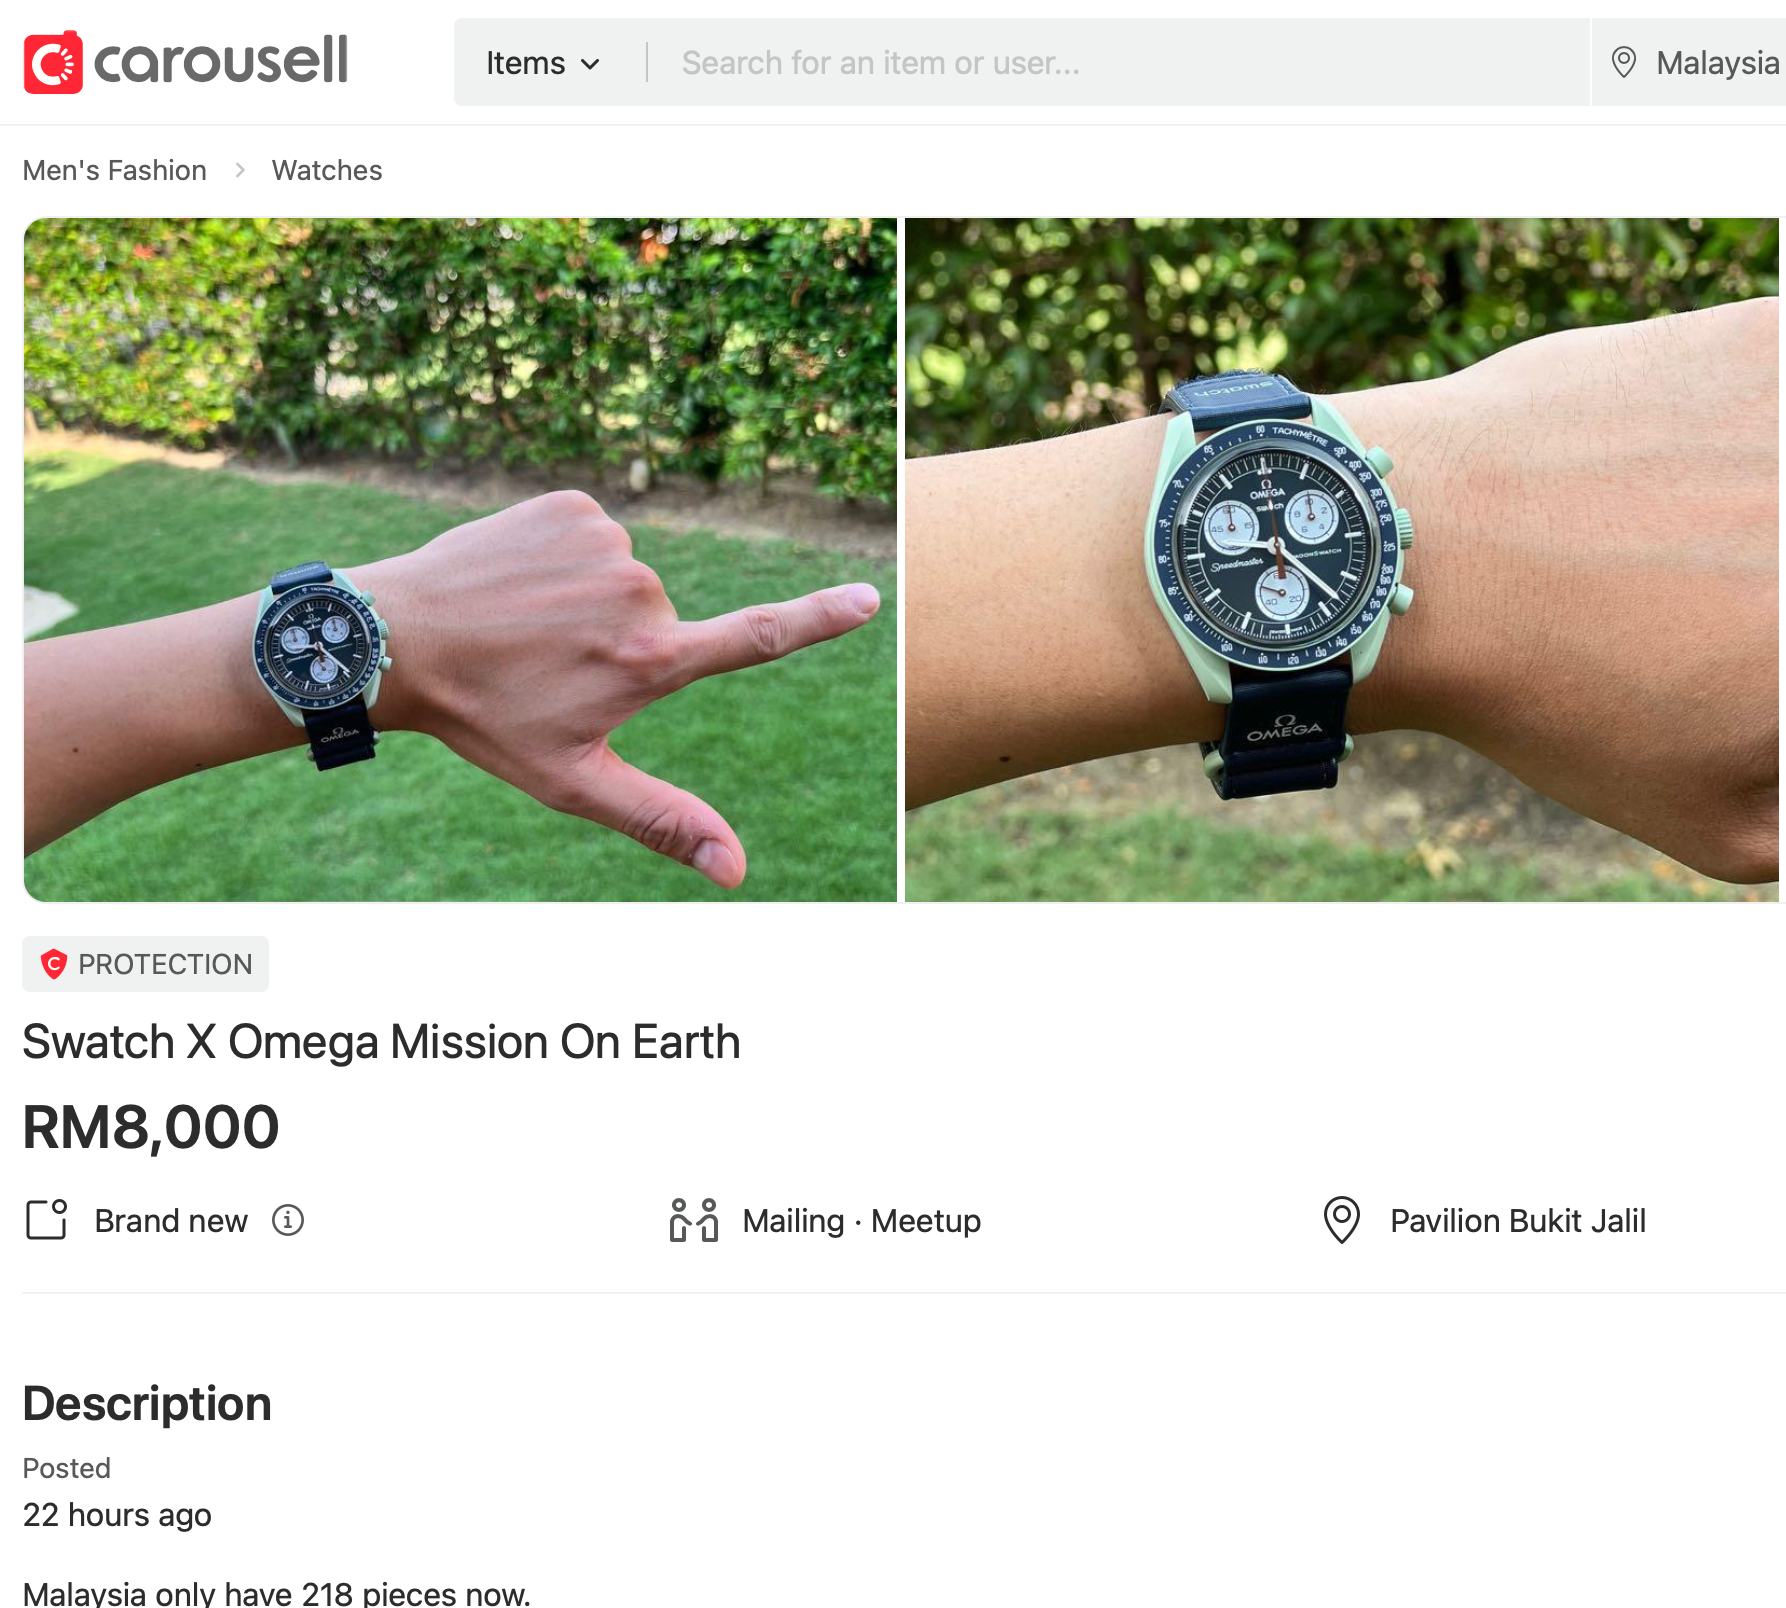 Omega swatch goes on carousell for rm8,000 003